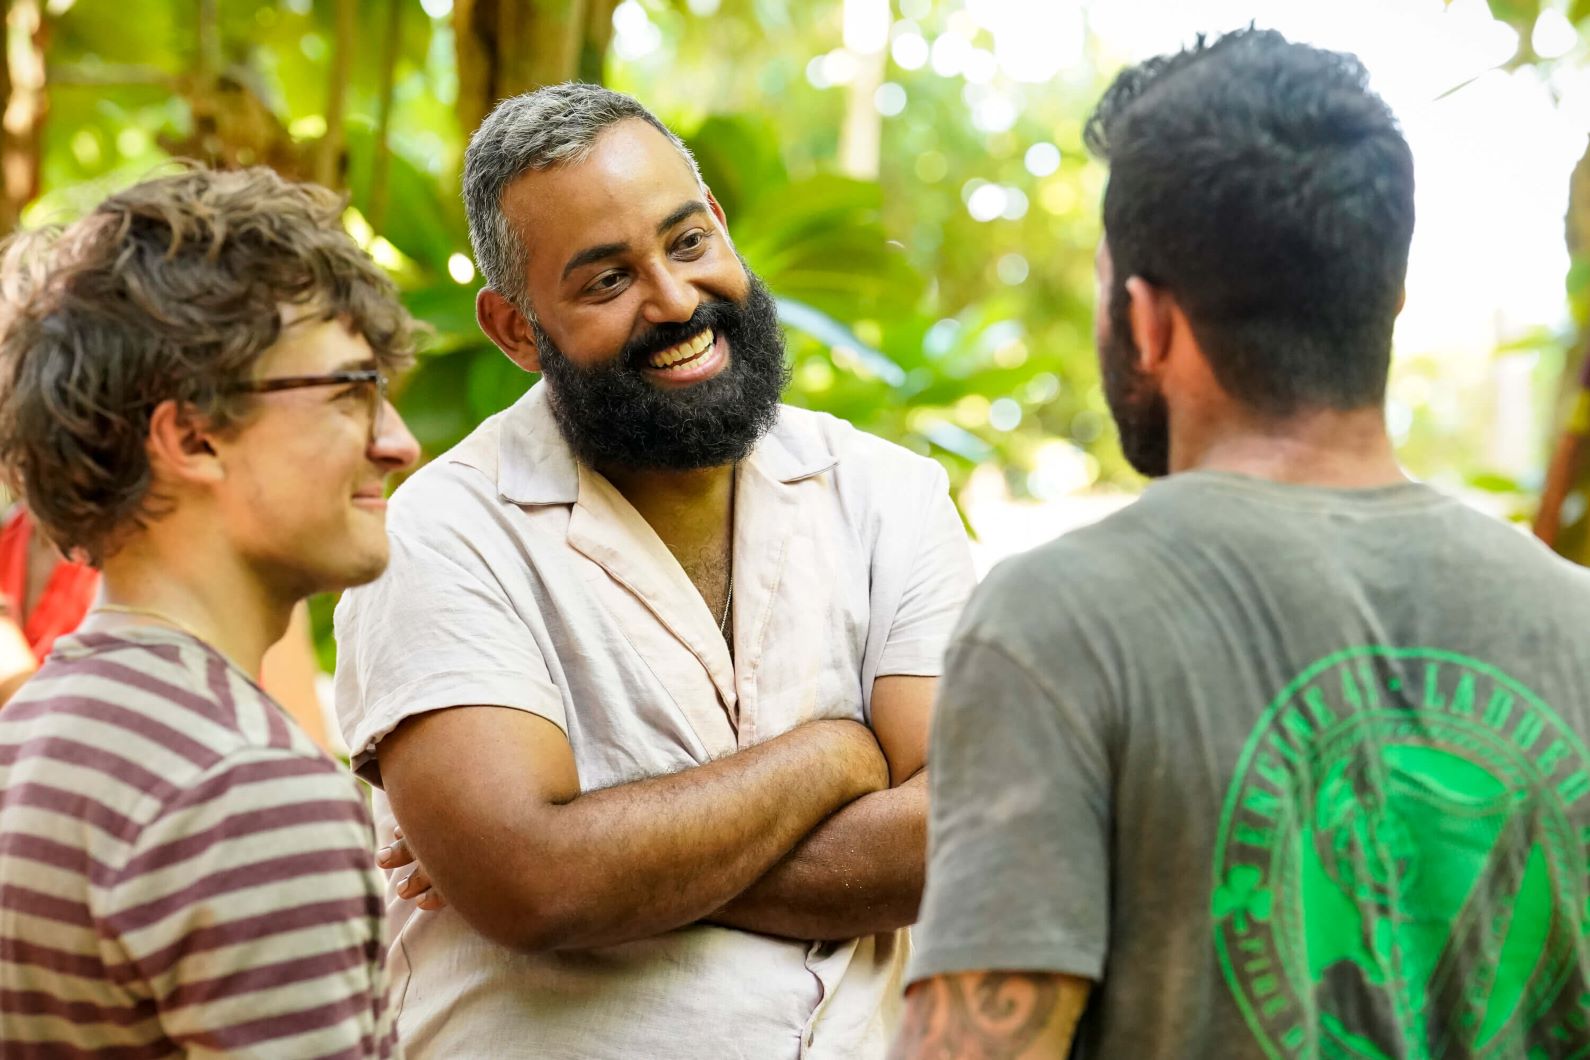 Carson Garrett and Yam Yam Arocho, who, according to 'Survivor 44' spoilers, make it to the final four, appear in 'Survivor 44' Episode 6. Carson wears a purple and light gray striped shirt. Yam Yam wears a white short-sleeved button-up shirt.